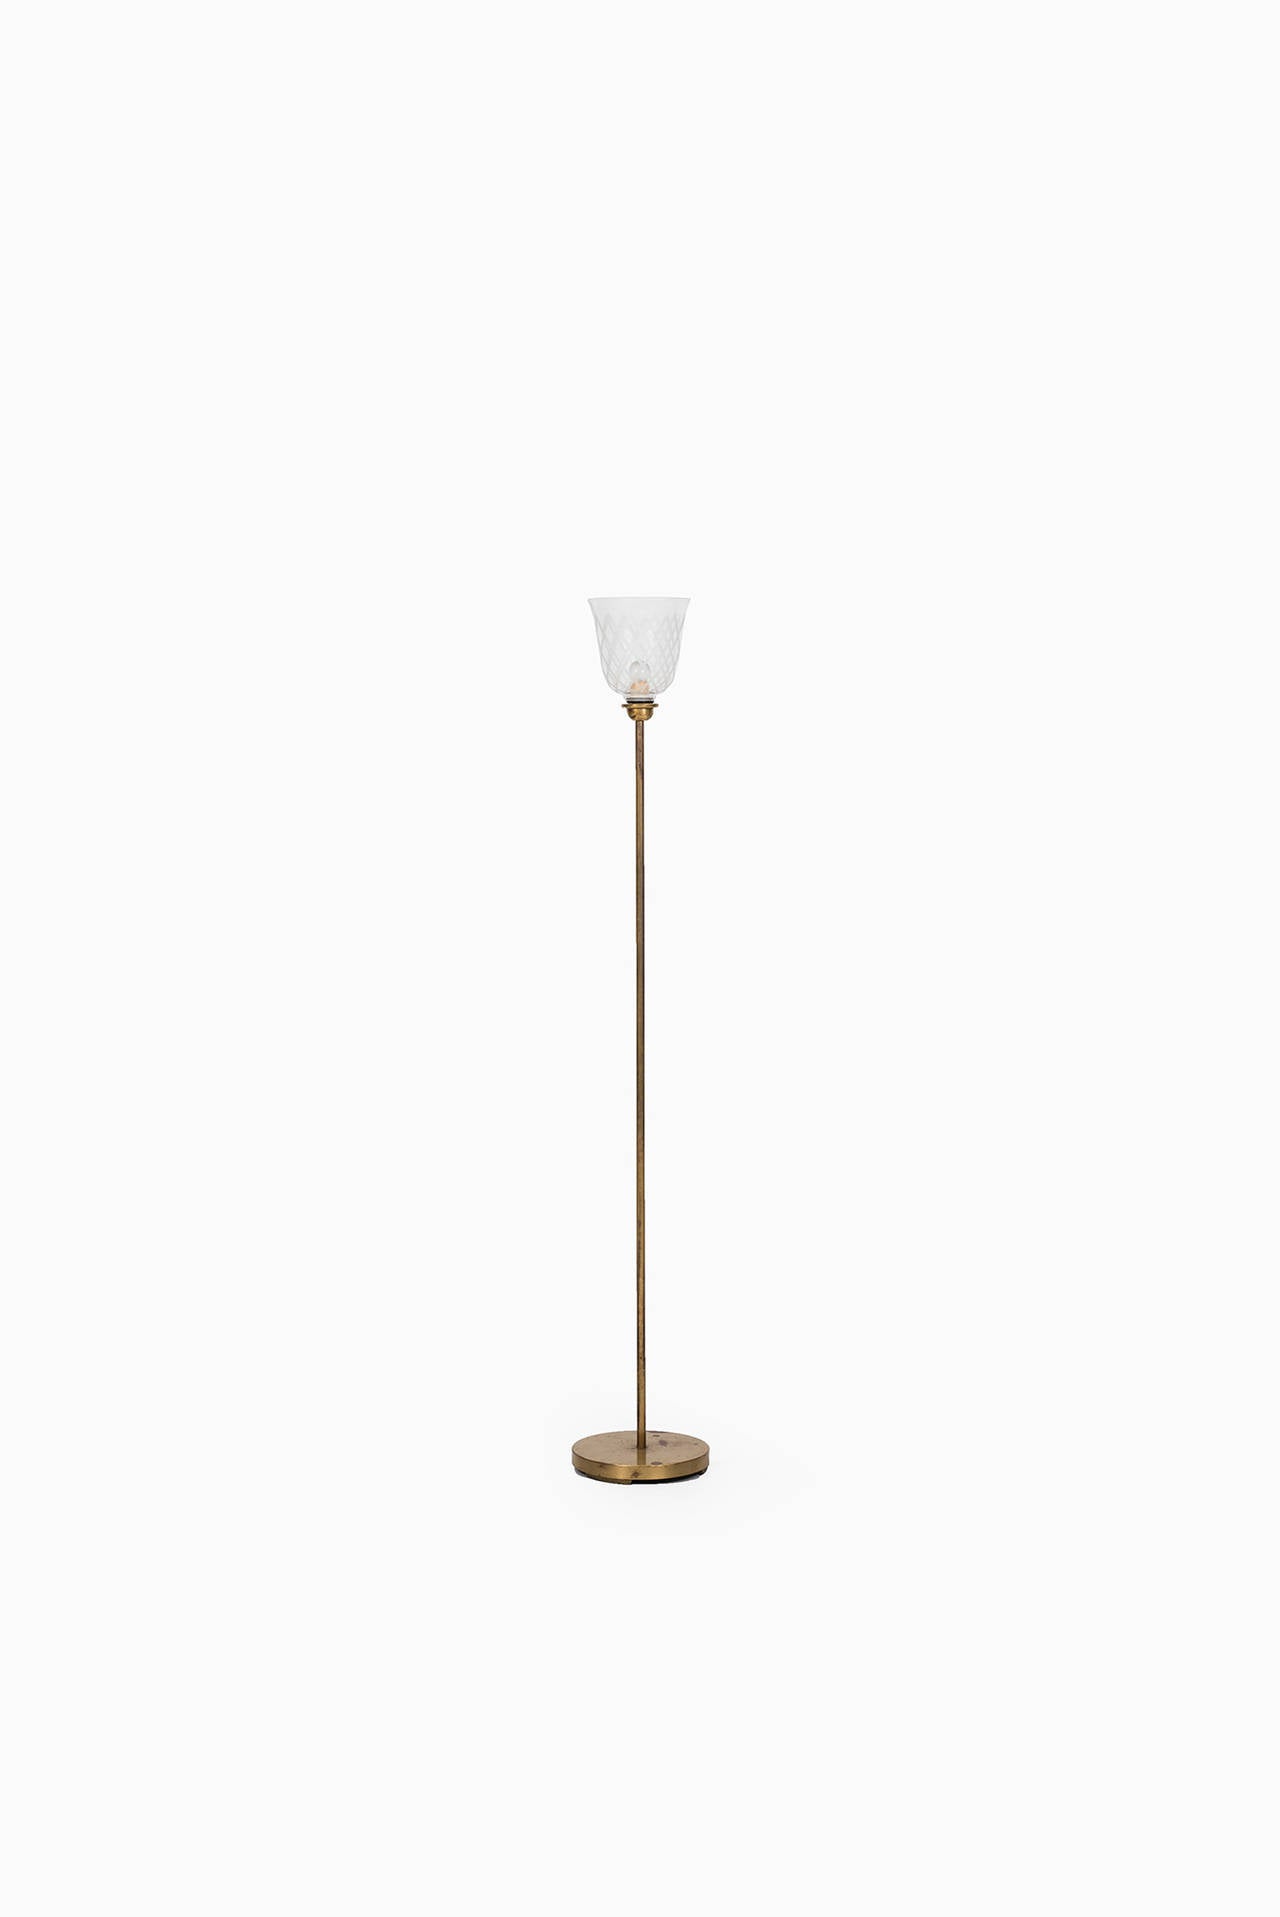 Rare floor lamp in brass and etched glass designed by Bo Notini. Produced by Glössner & Co in Sweden.